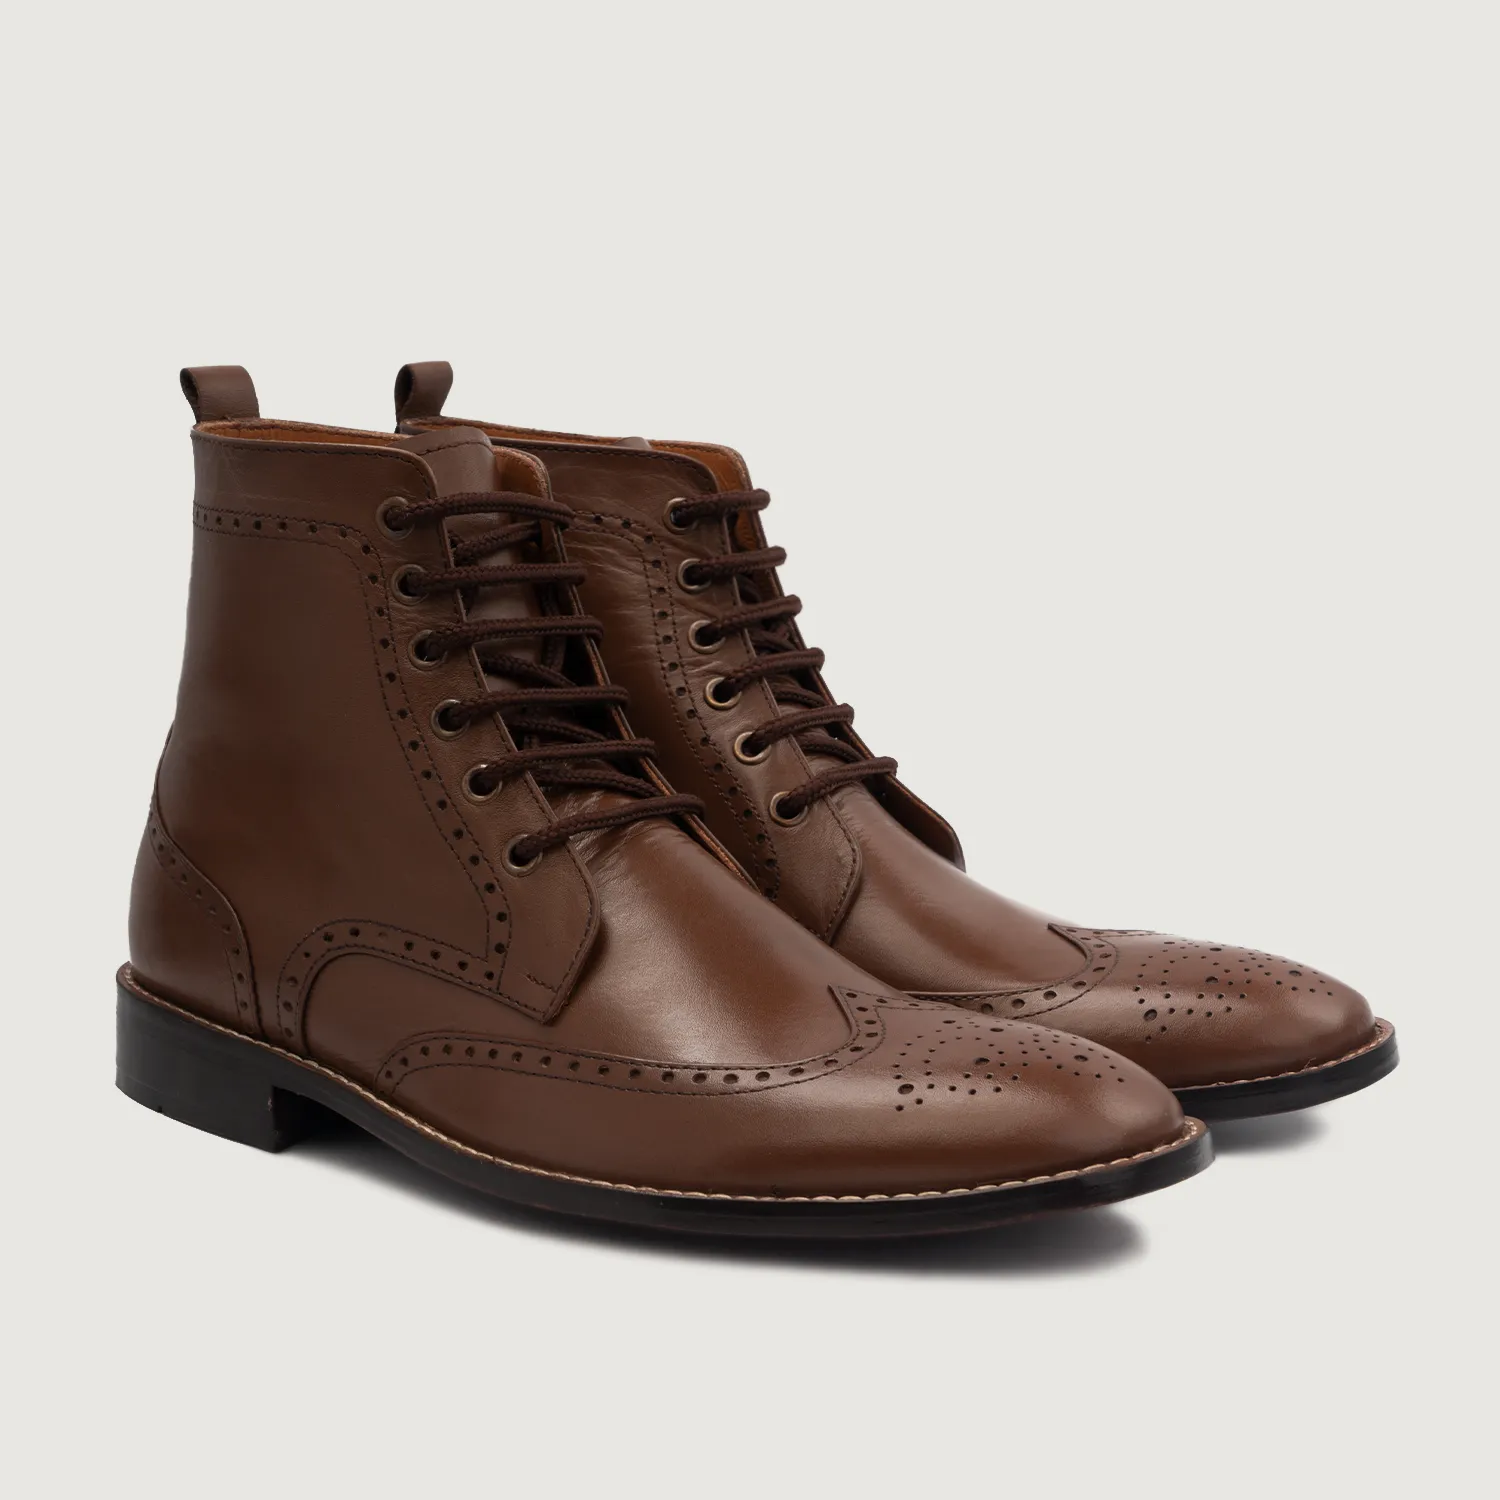 Duster Brogues Derby Brown Leather Boots